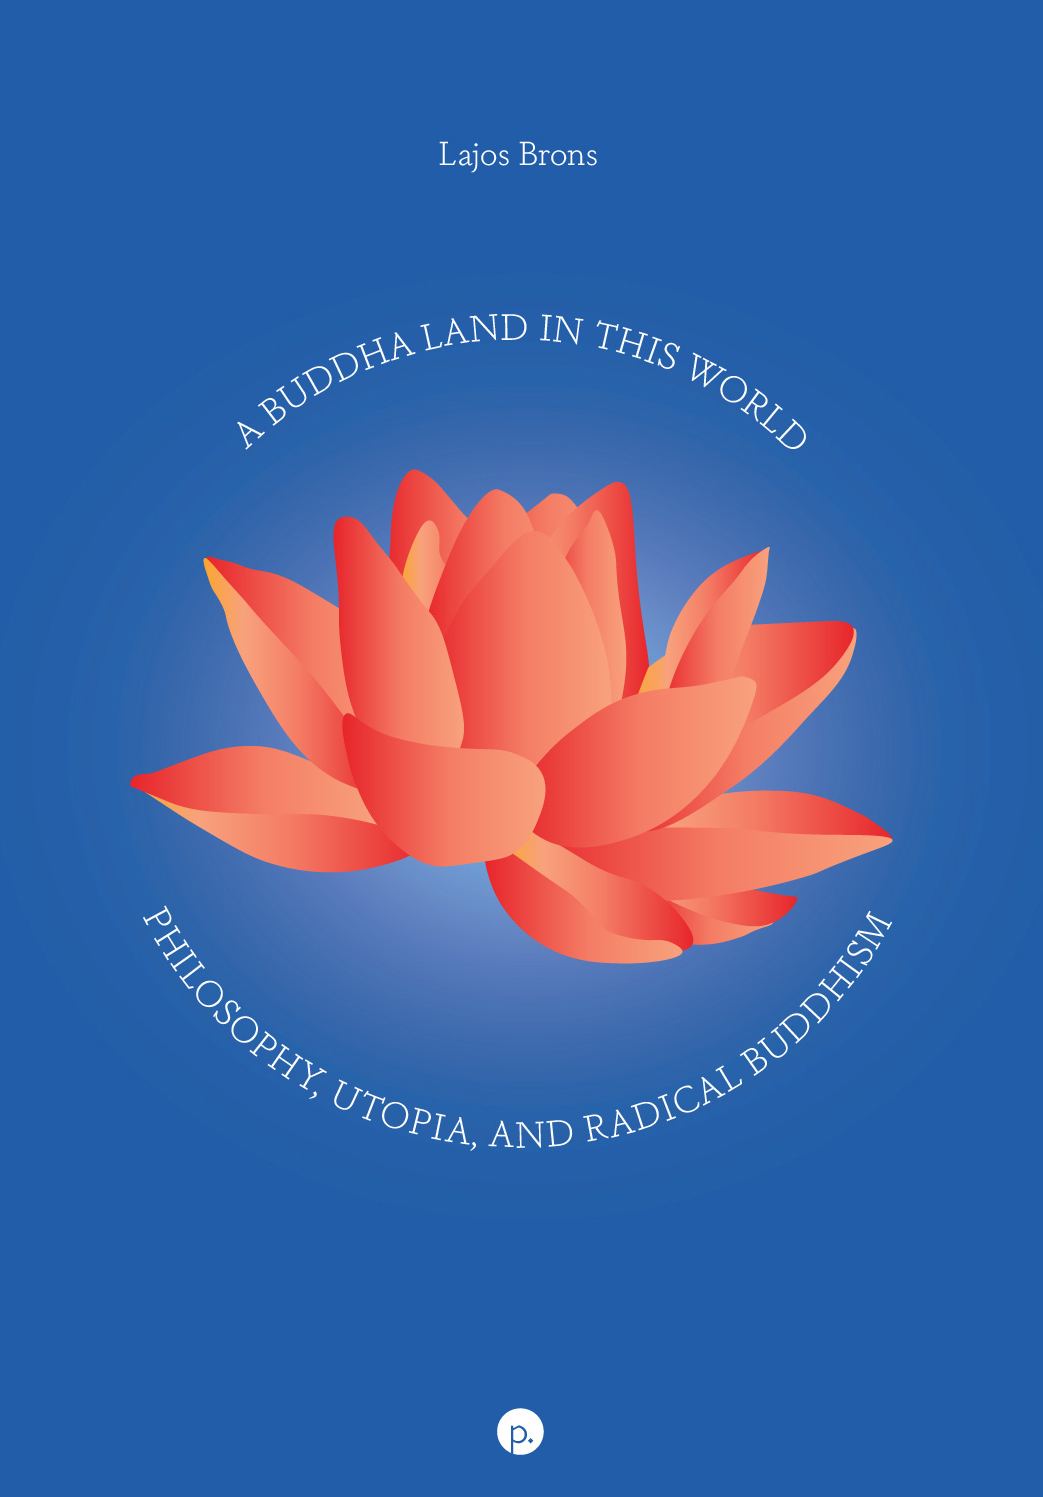 cover for A Buddha Land in This World: Philosophy, Utopia, and Radical Buddhism